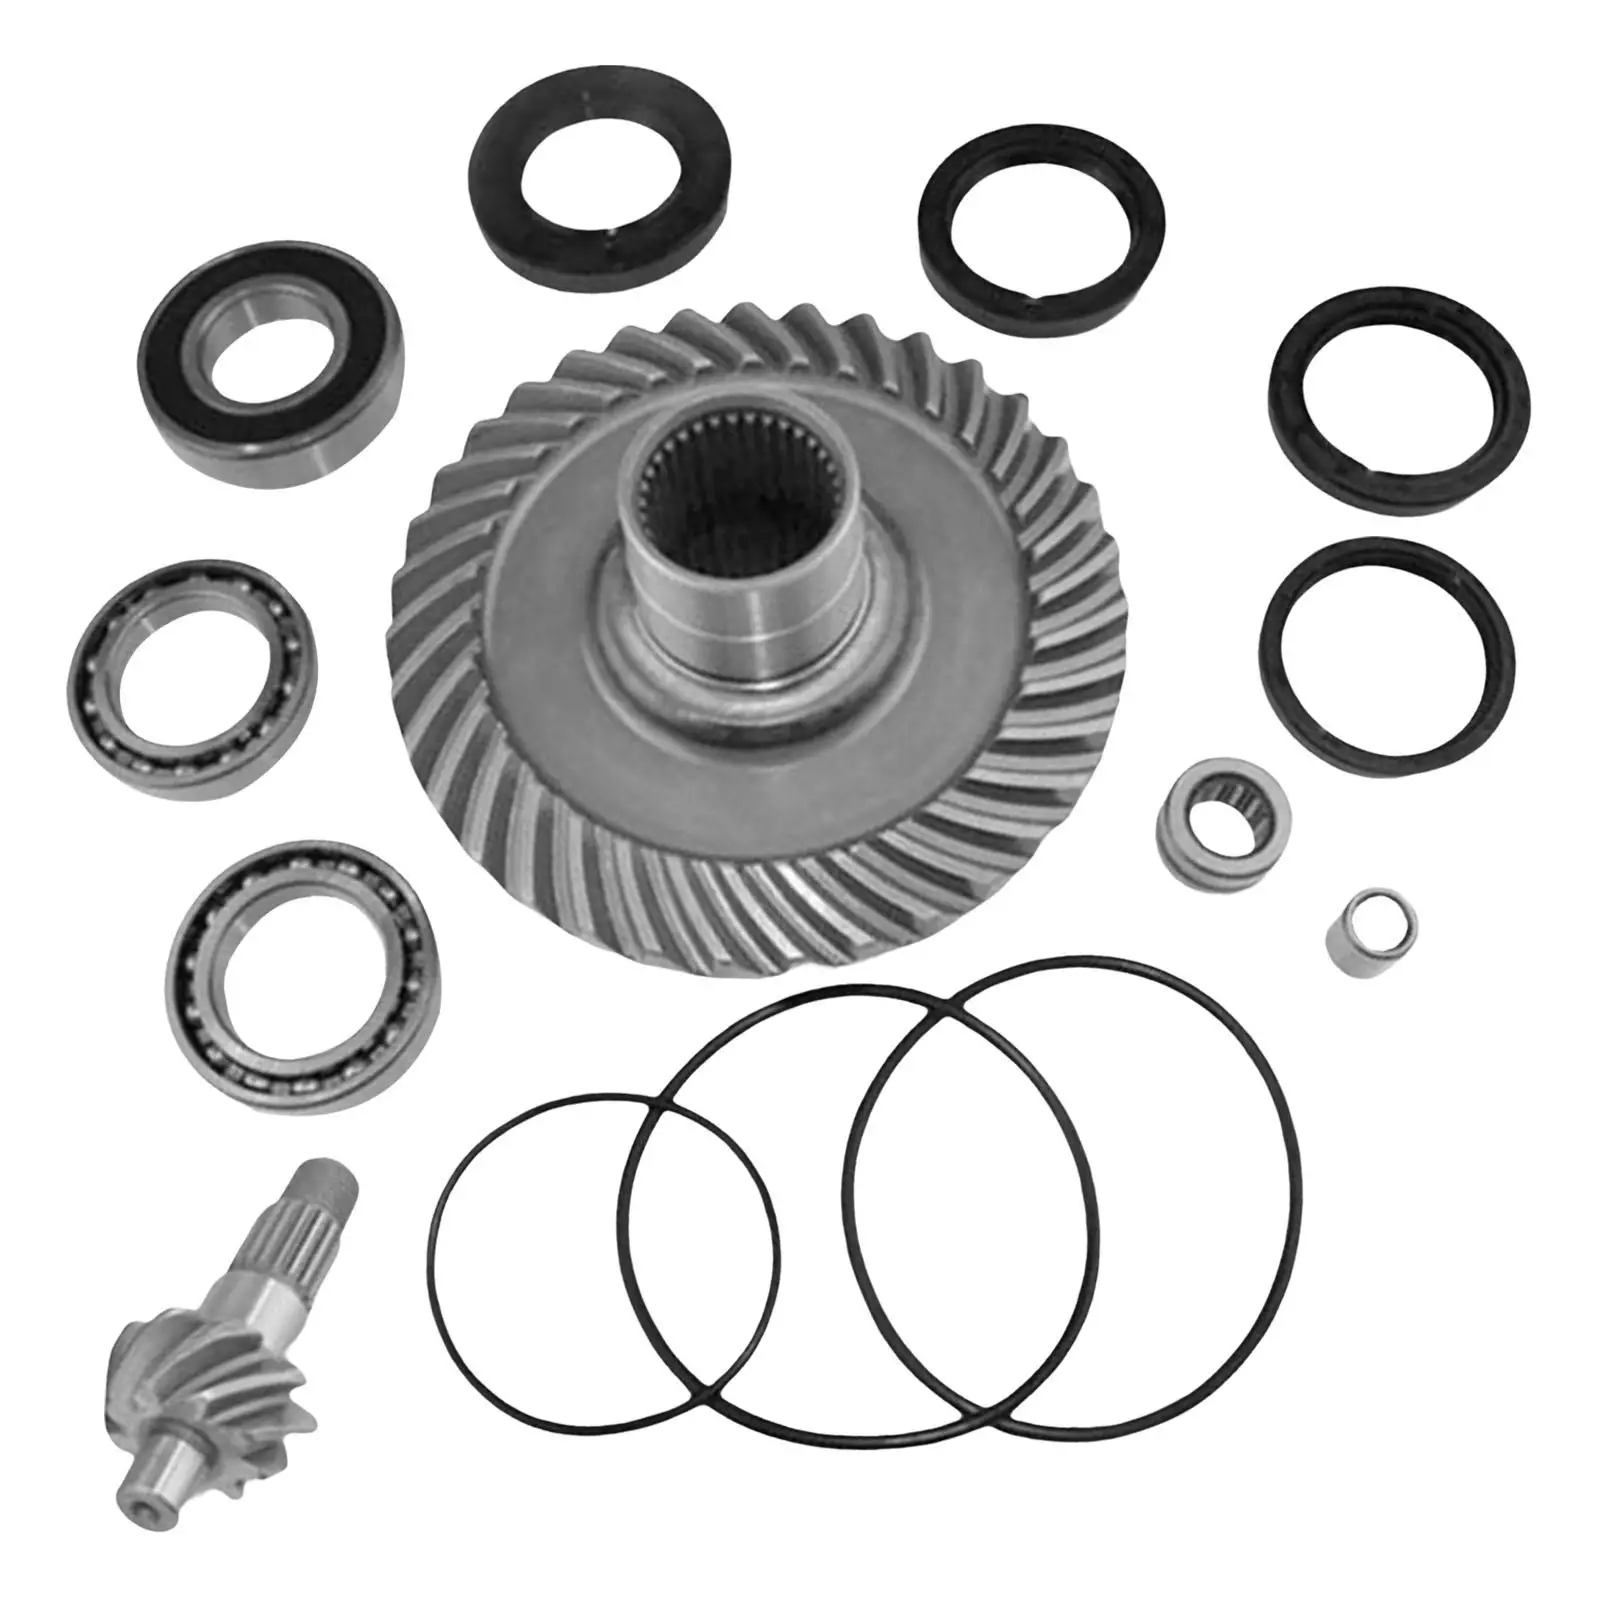 Rear Differential Ring Gear Kit Replacecment 127447 Fit for Honda TRX300FW Fourtrax 4x4 1988-2000